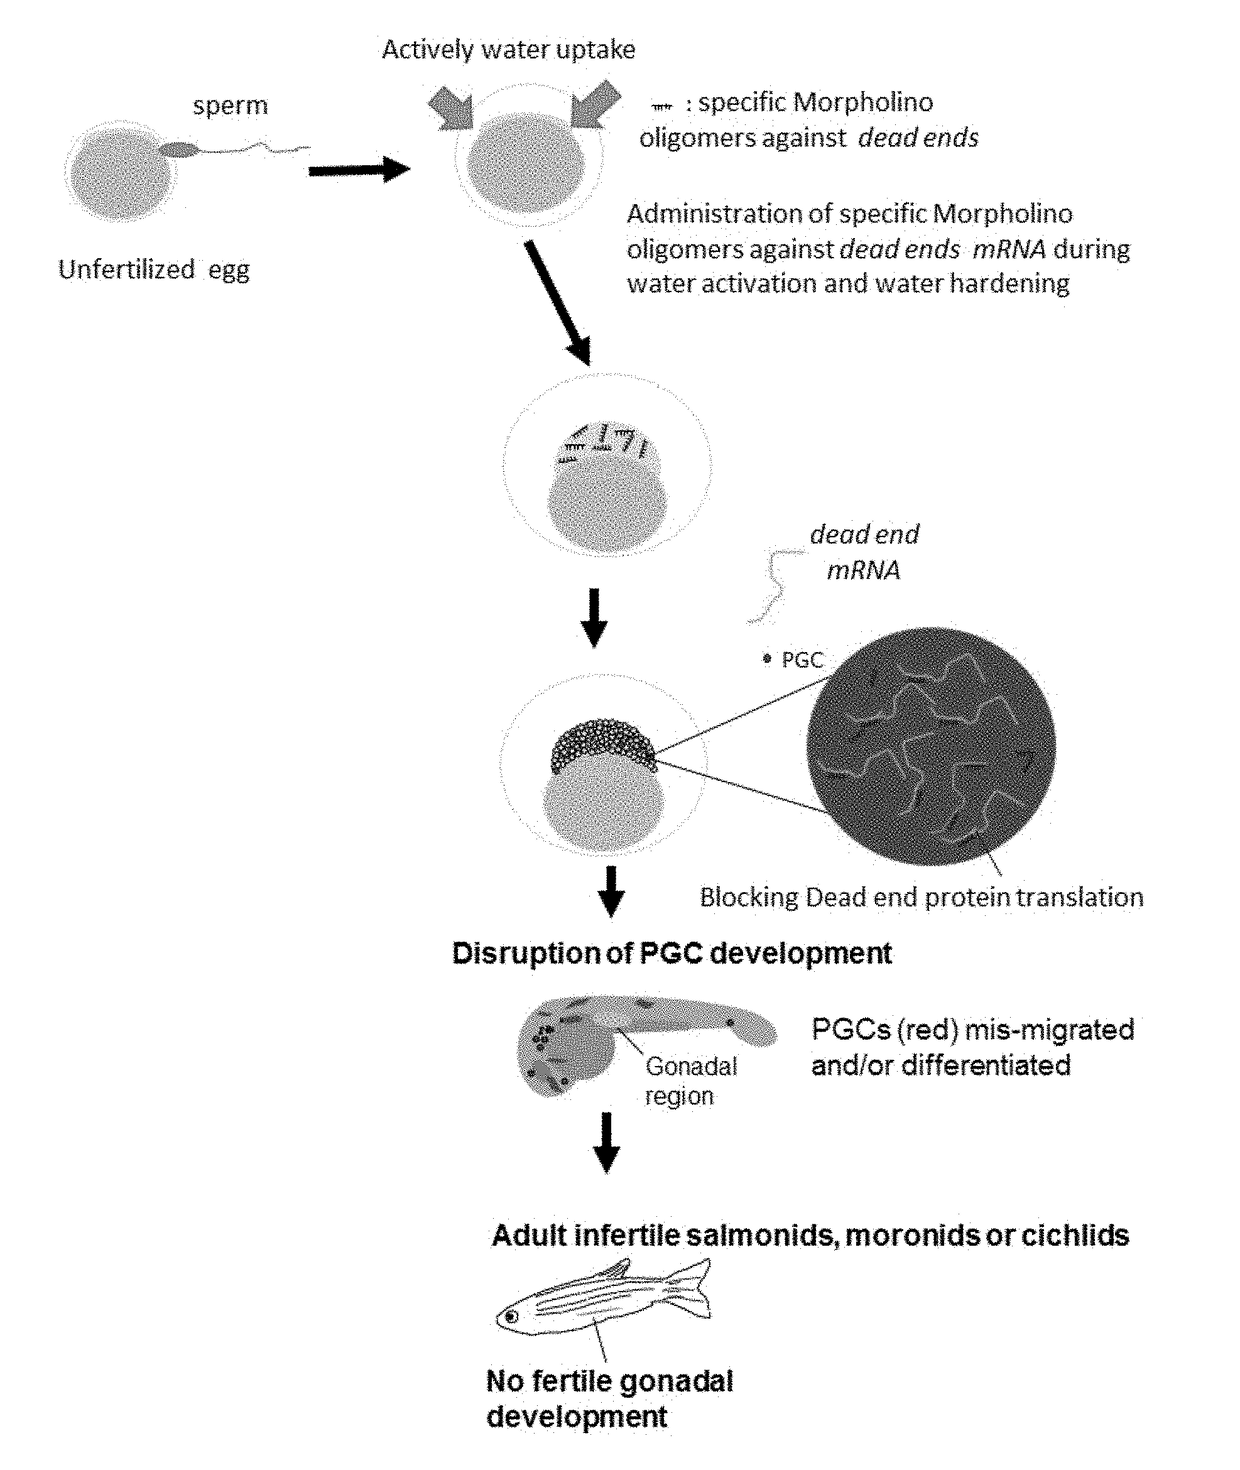 Methods of agent delivery into eggs and embryos of egg-producing aquatic animals for drug screening, agent toxicity assay and production of infertile fish